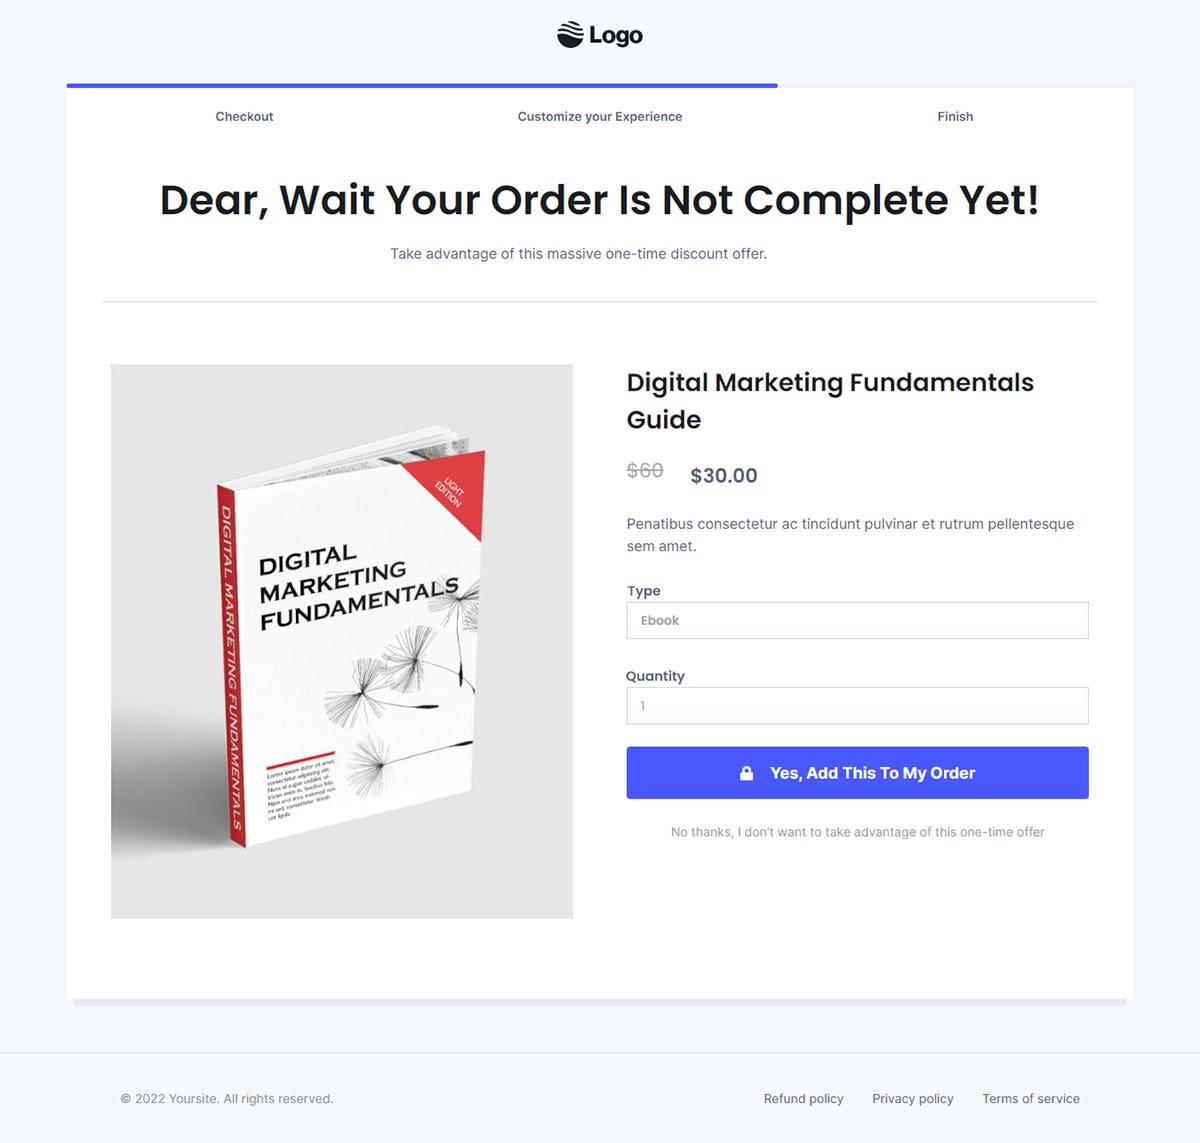 😍 Store Checkout #1: Sales Funnels Free Template - bit.ly/3EBCPWv

✋🏻 YES! I want my free ebook.

Increase Your Sales with the Ultimate Funnel Software!

#SalesFunnelDesign #SalesFunnelExpert #SalesFunnelMastery #SalesFunnelOptimization